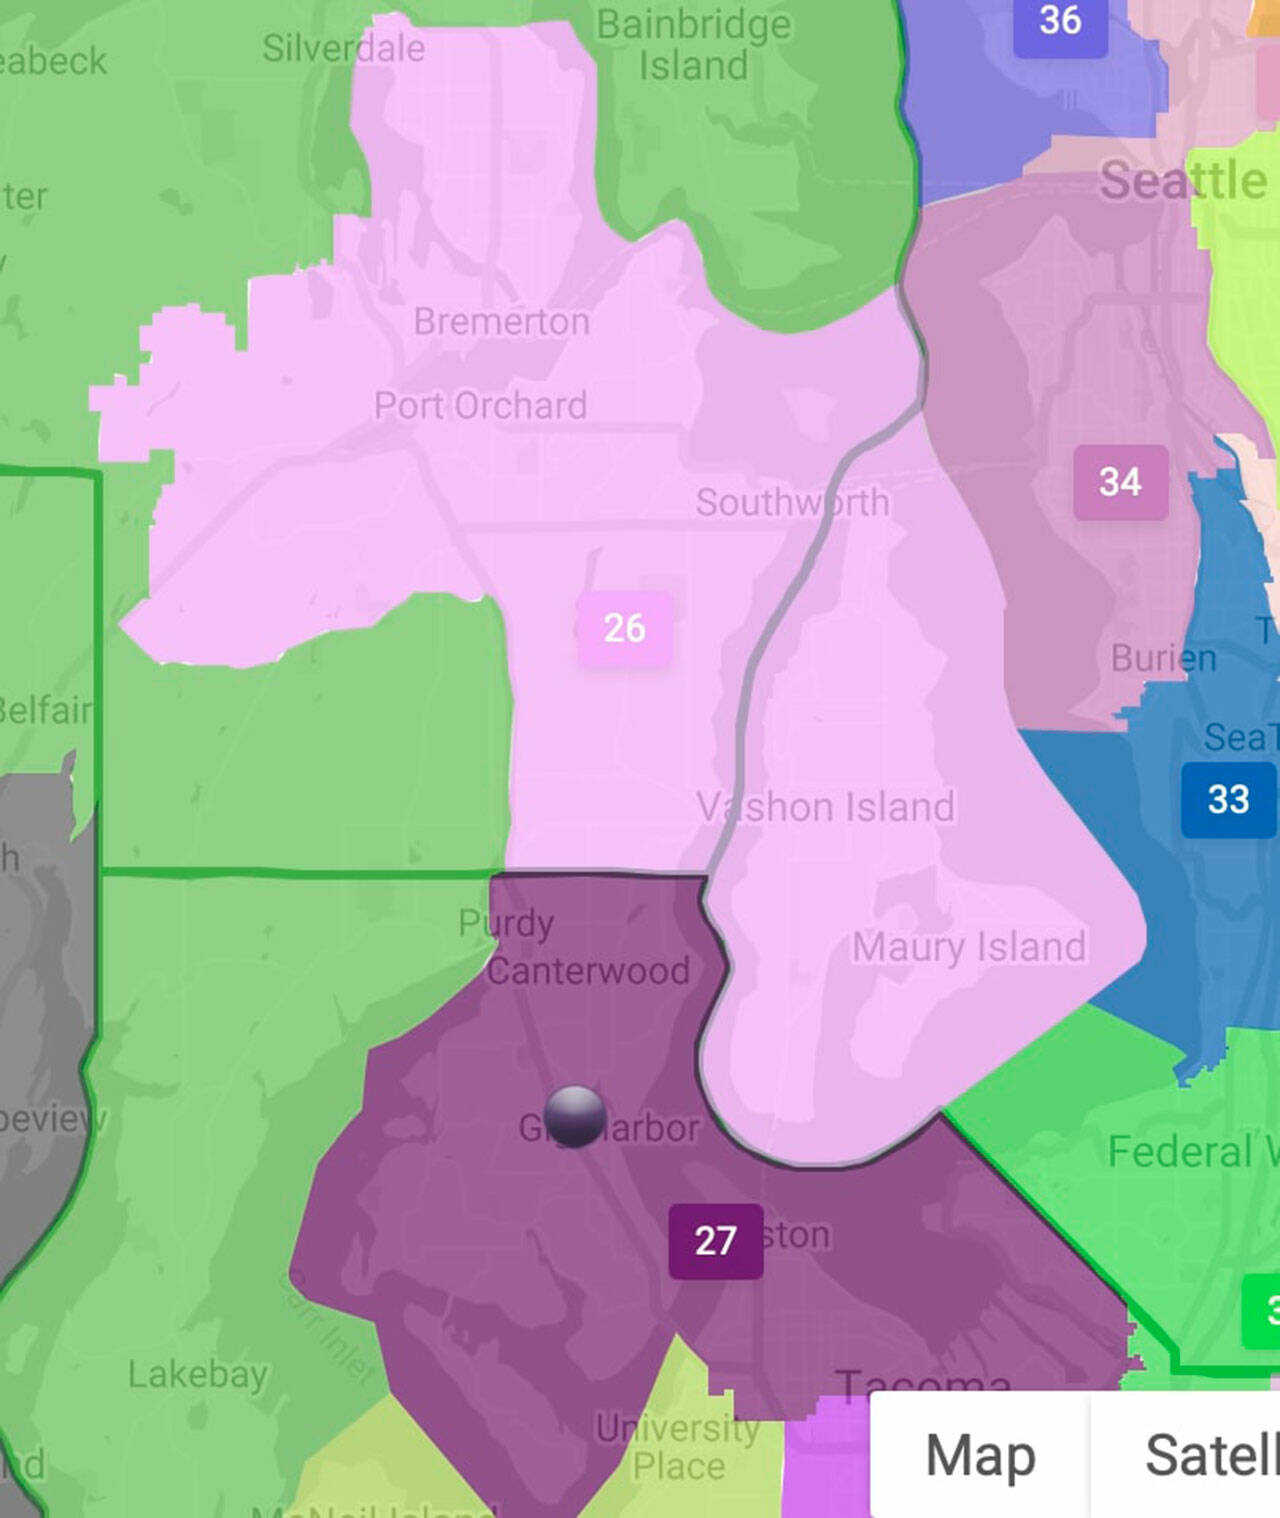 Graphic Courtesy The Washington Observor
Commissioner Walkinshaw’s reshaped 26th, 34th, and 27th districts.